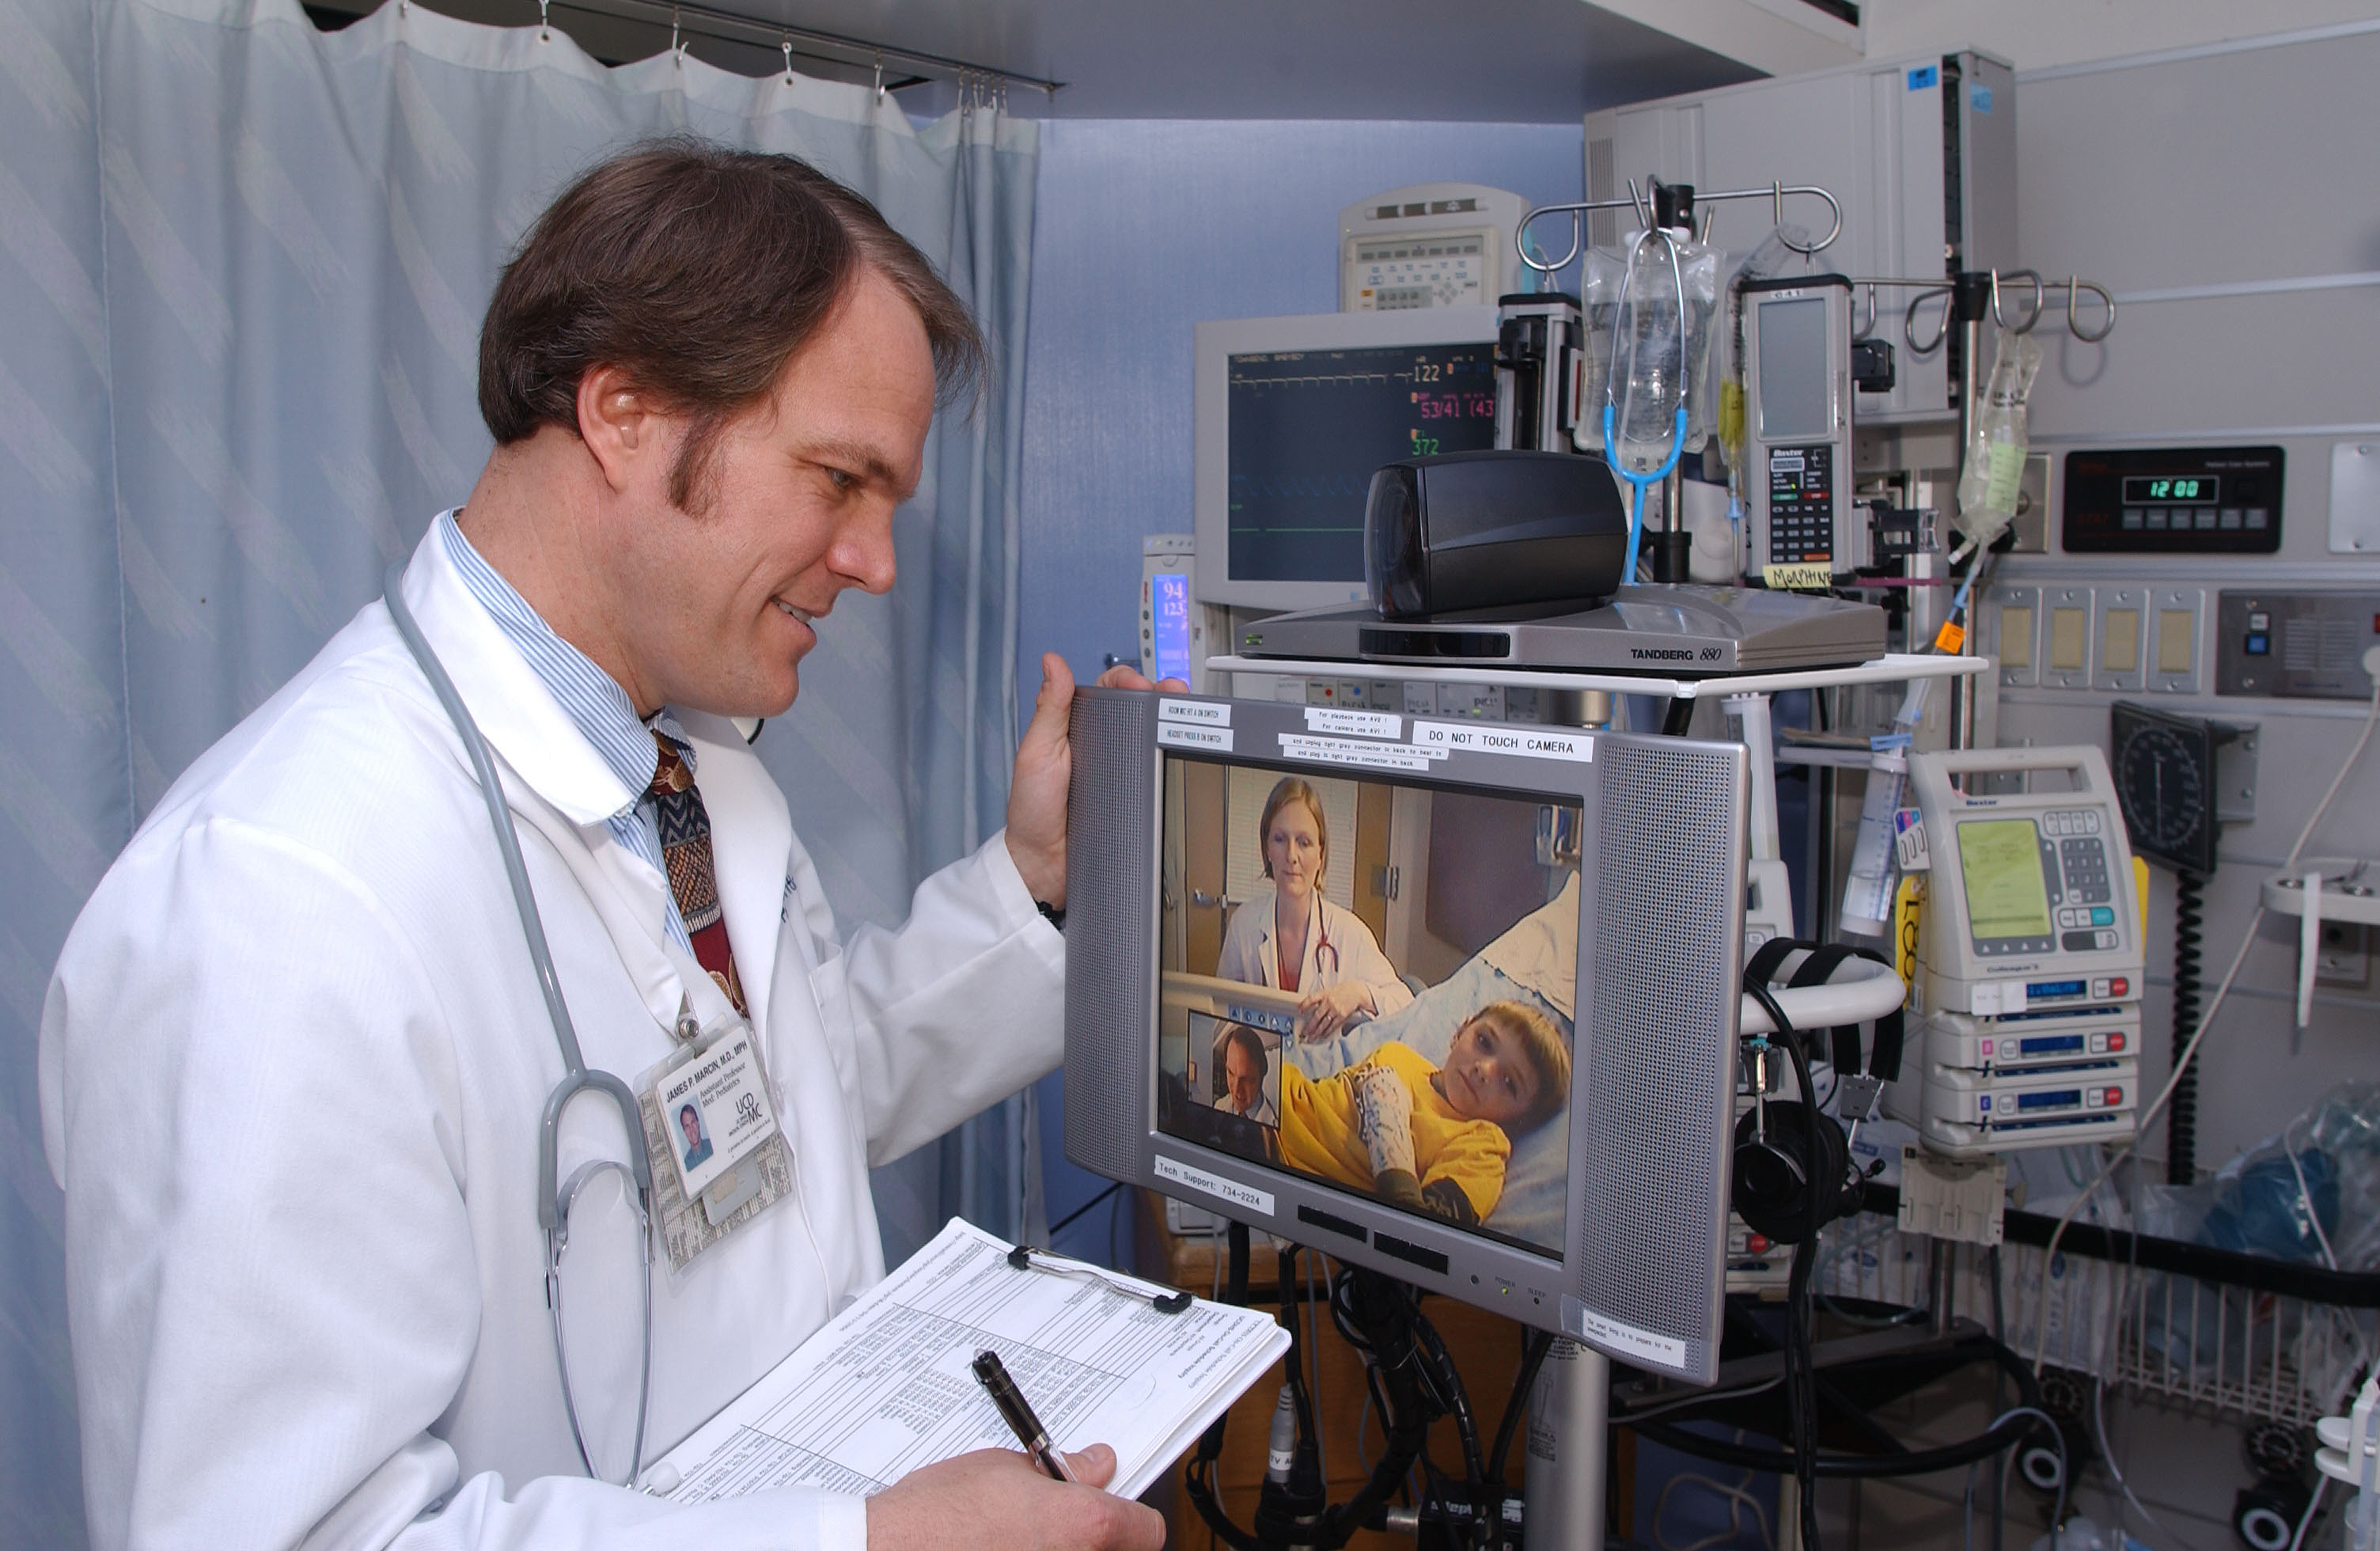 Figure1B - An example of a Teleconsultation. A subspecialist physician consults with another physician, at a distant medical facility, to provide specialty knowledge for treating a child. 